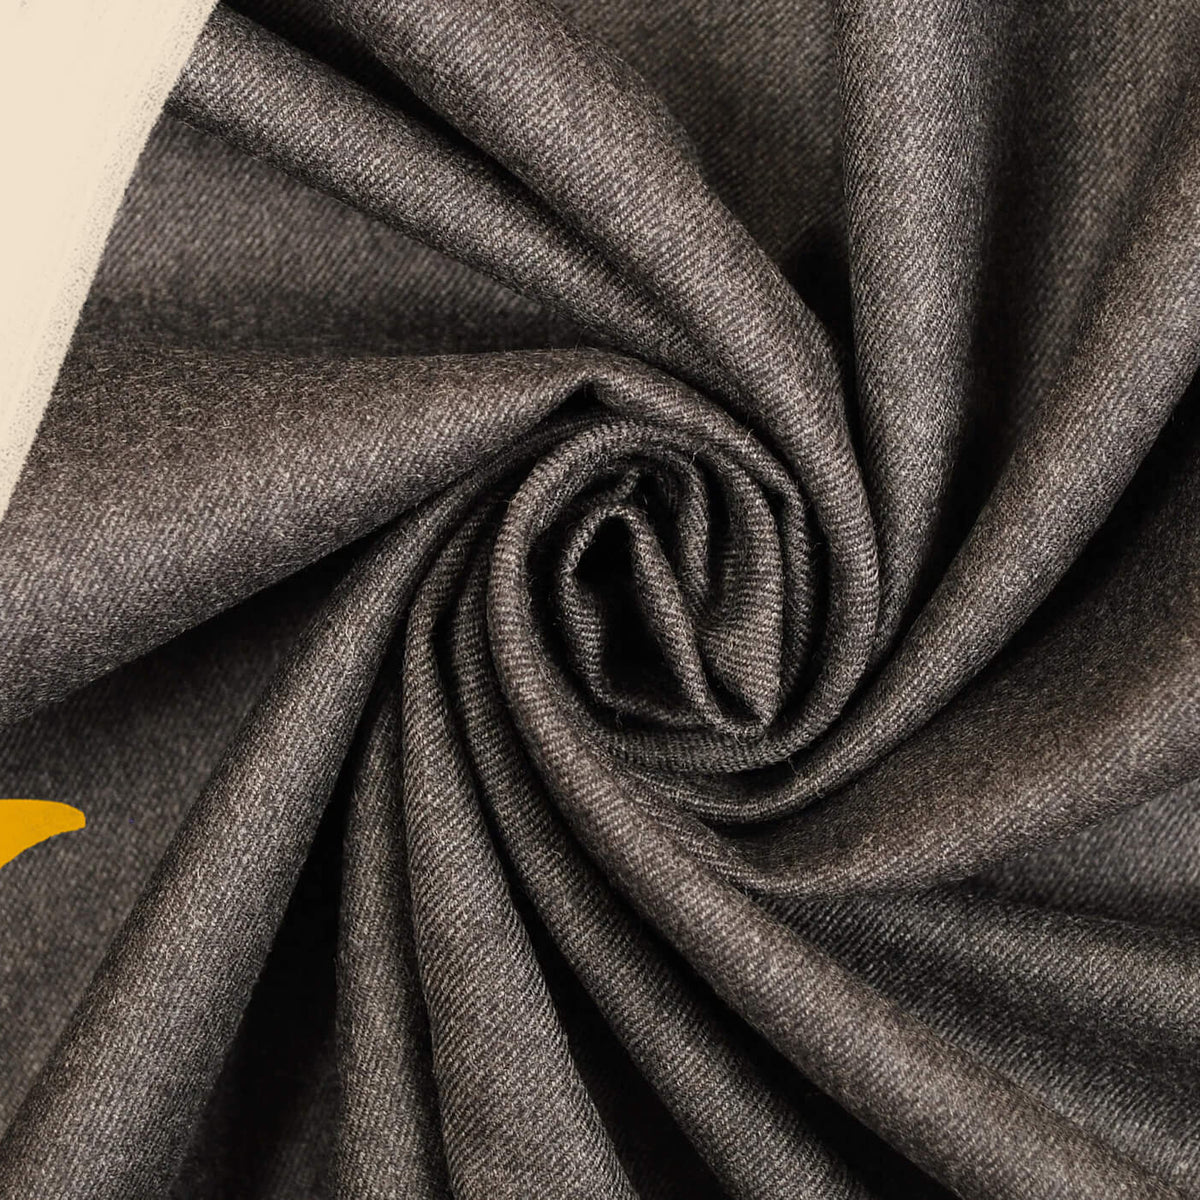 How To Care For Cashmere Wool Fabric: A Comprehensive Guide - Fabriclore